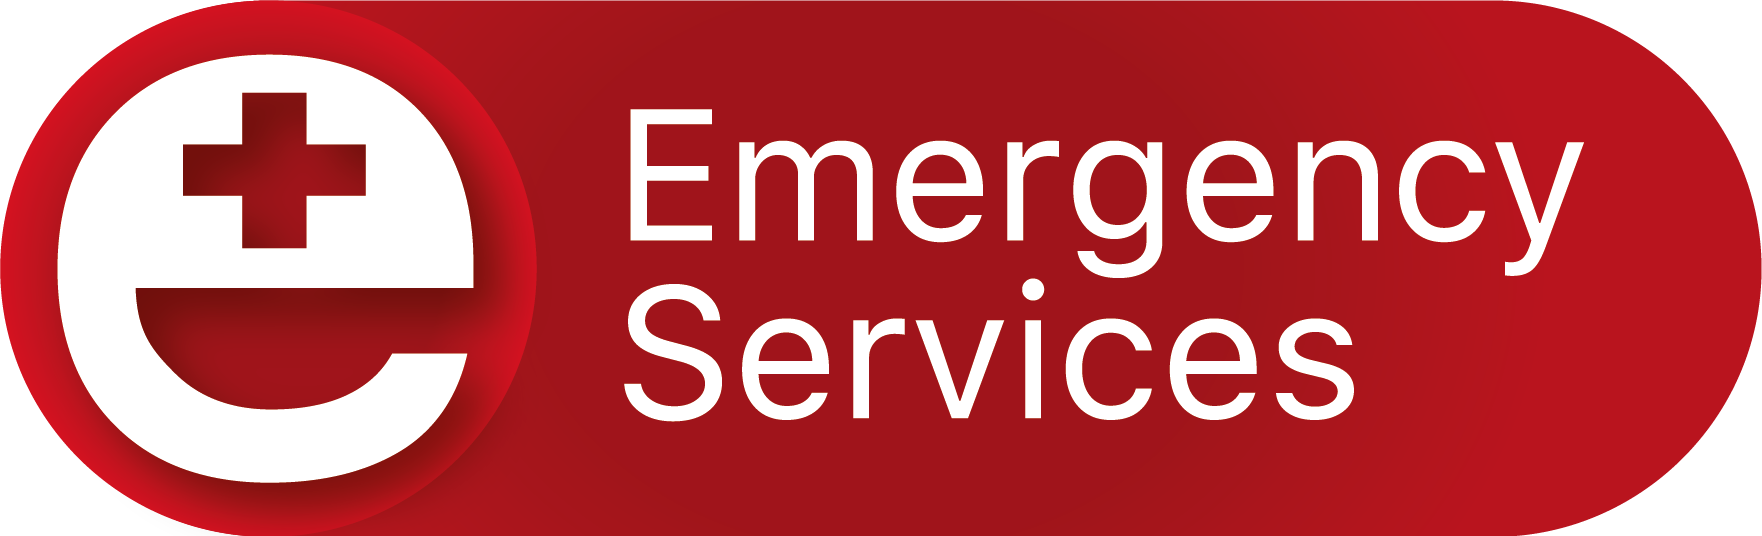 Emergency Services Journal